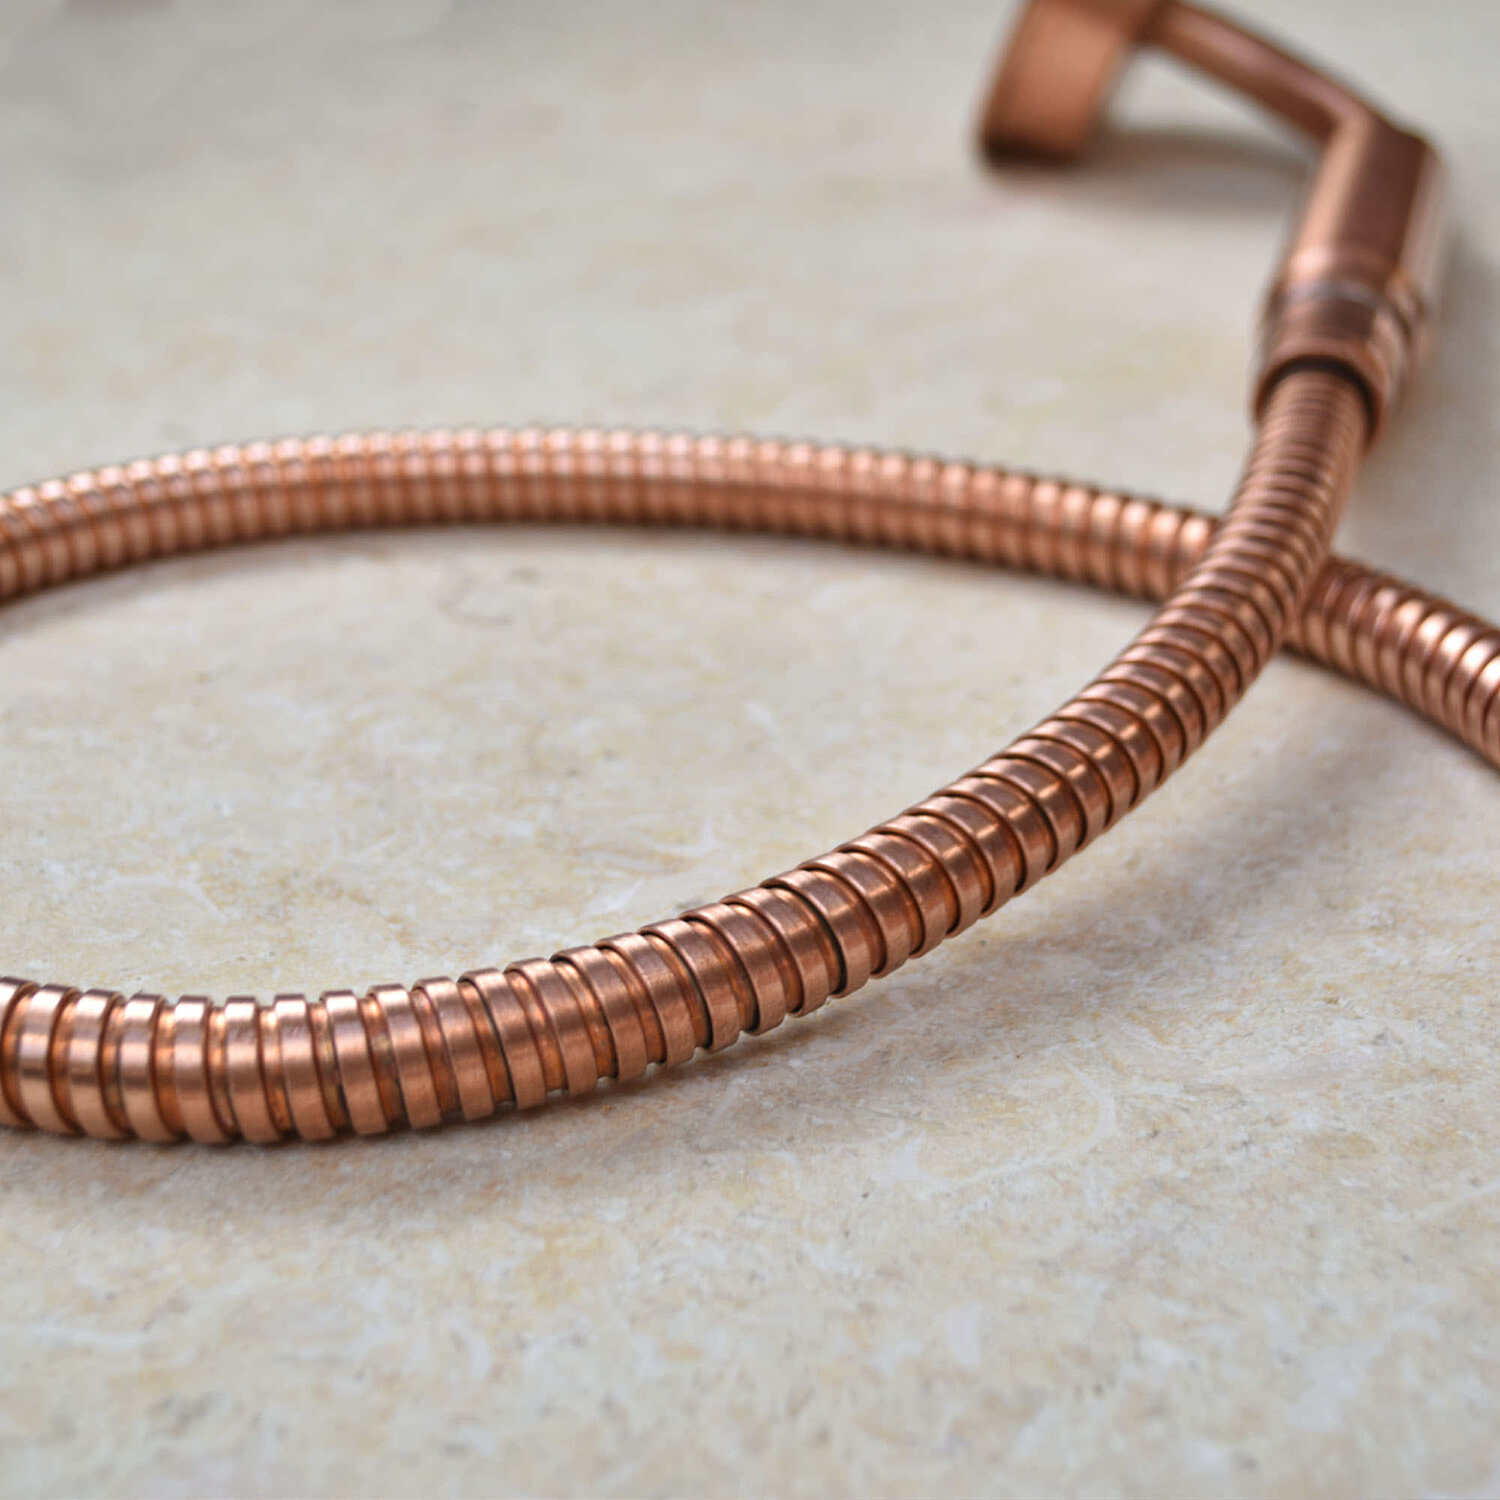 Copper hand-shower and copper flexible hose - shower accessories available at Proper Copper Design